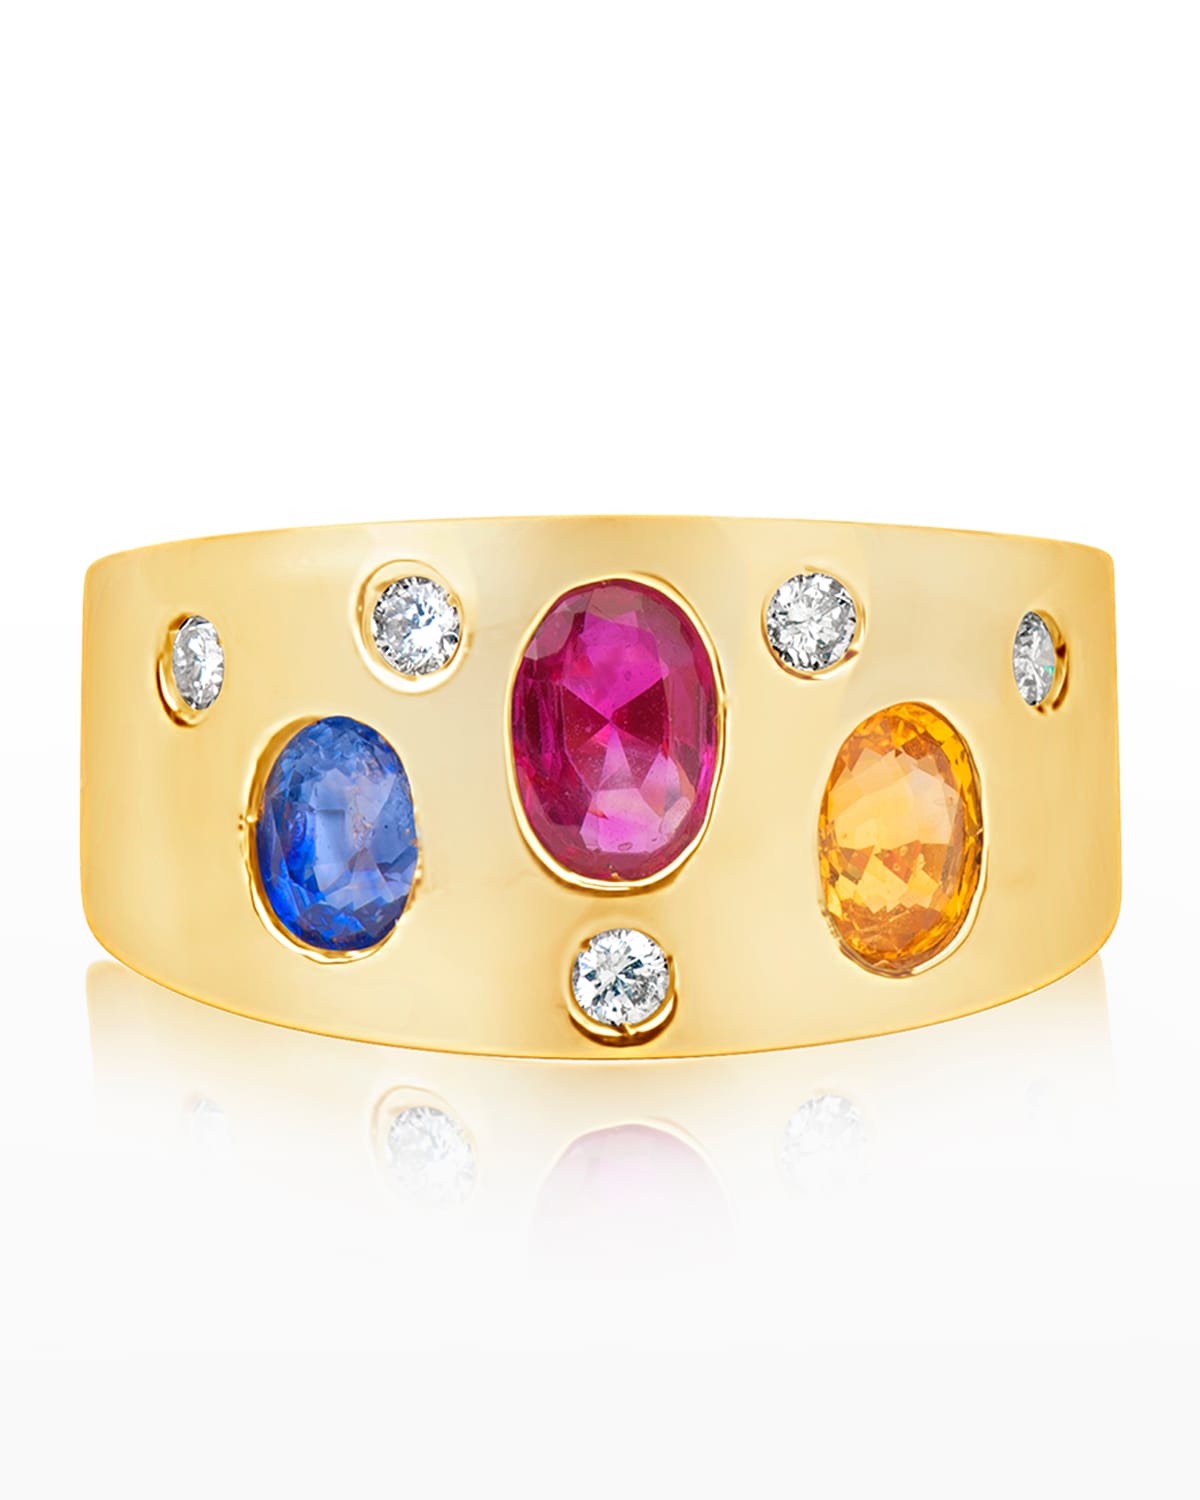 Andreoli Yellow Gold Diamond, Ruby and Sapphire Ring